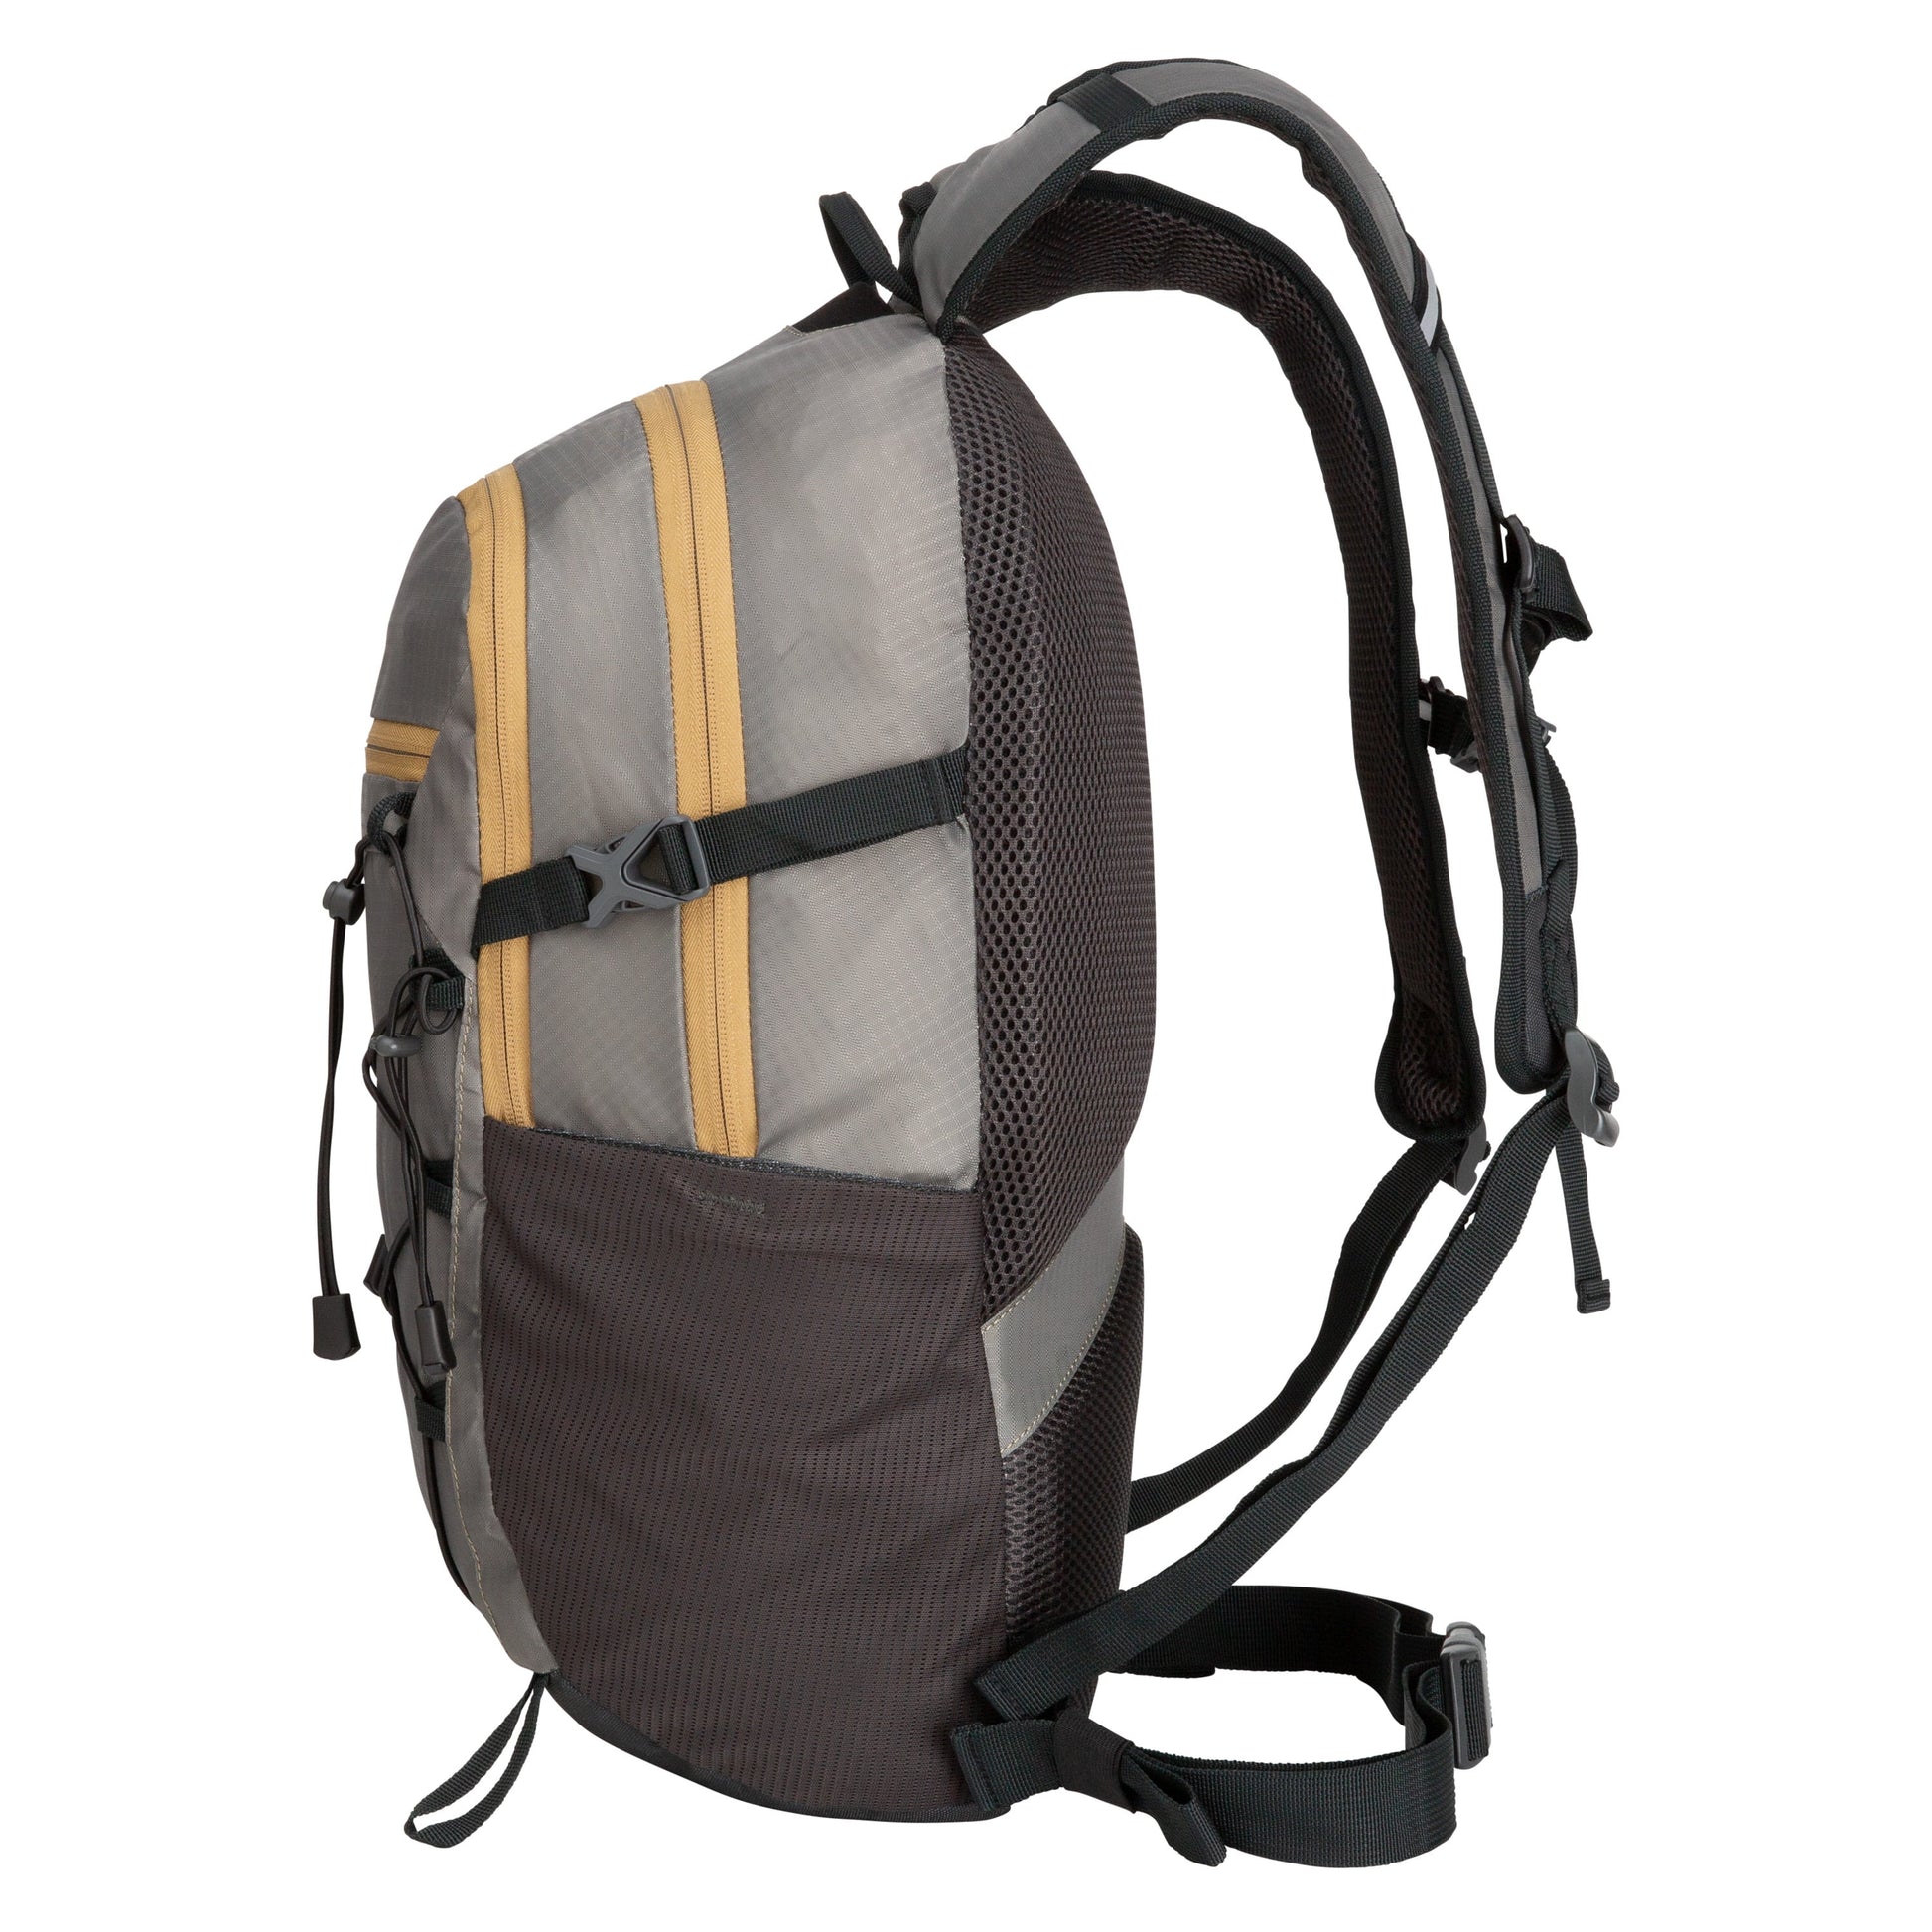 17 L Camping, Hiking, Mountaineering, Technical Backpack, Gray, Unisex